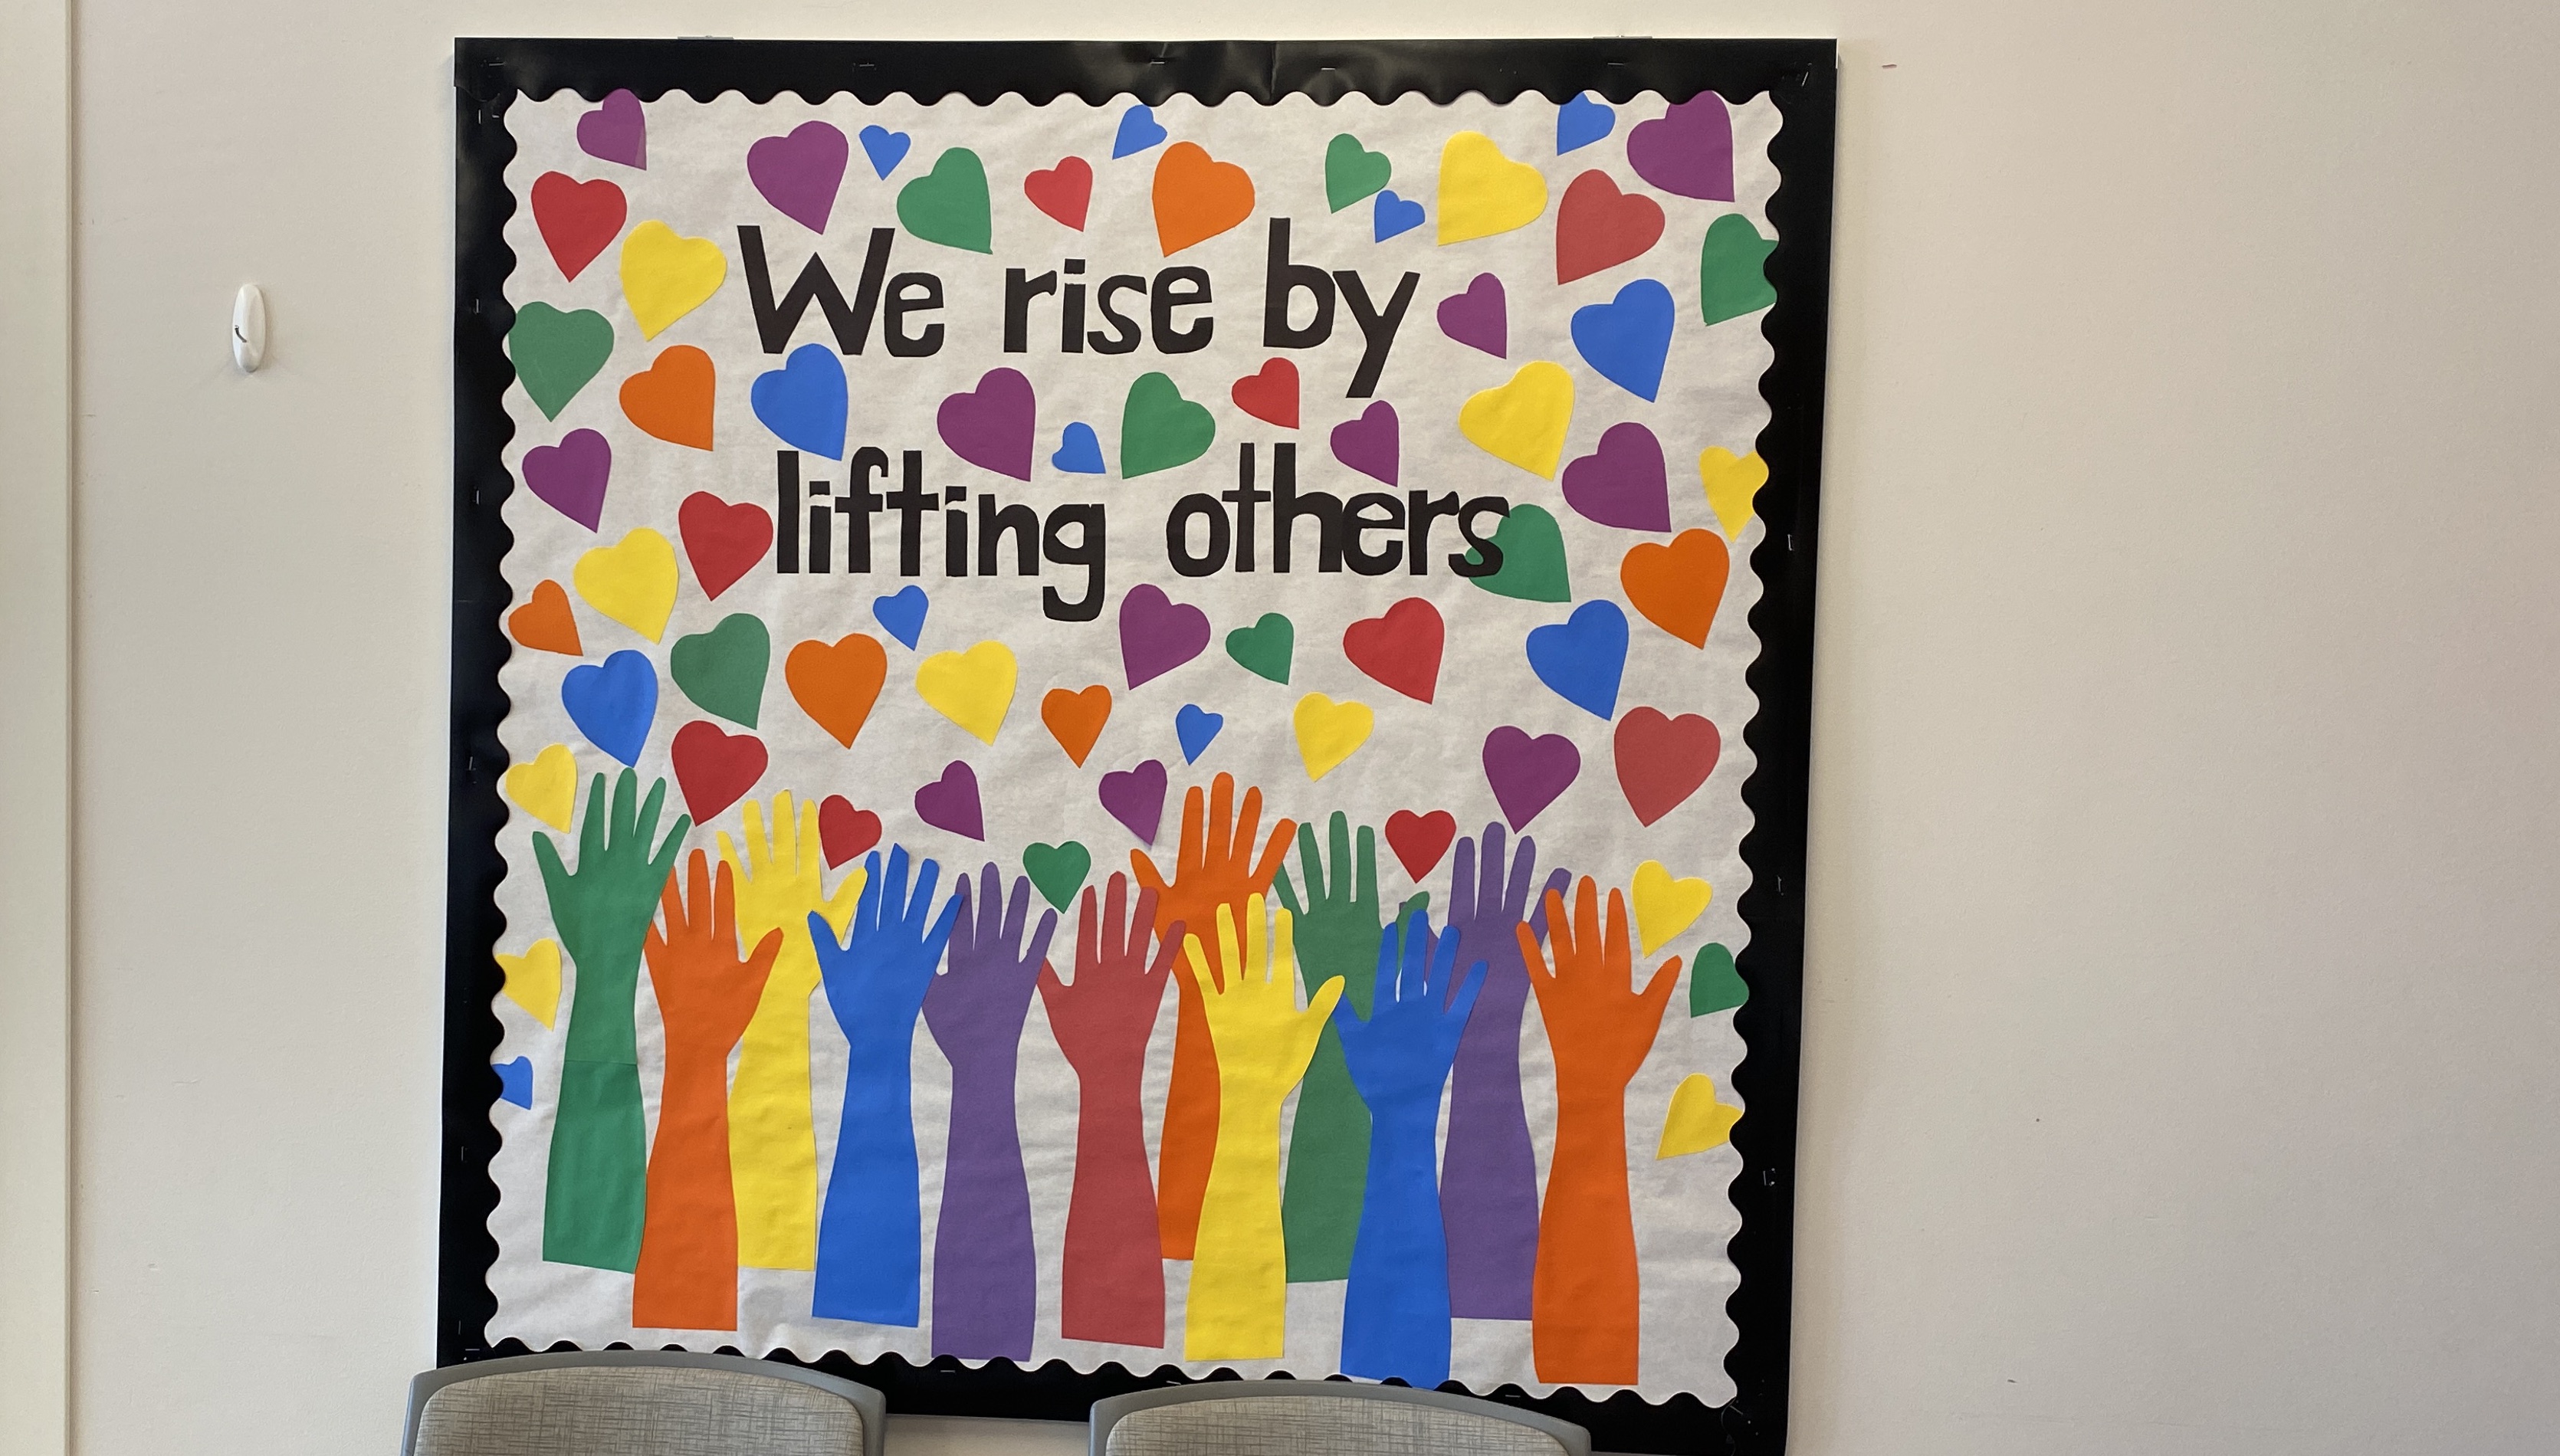 bulletin board that says "We Rise By Lifting Others."